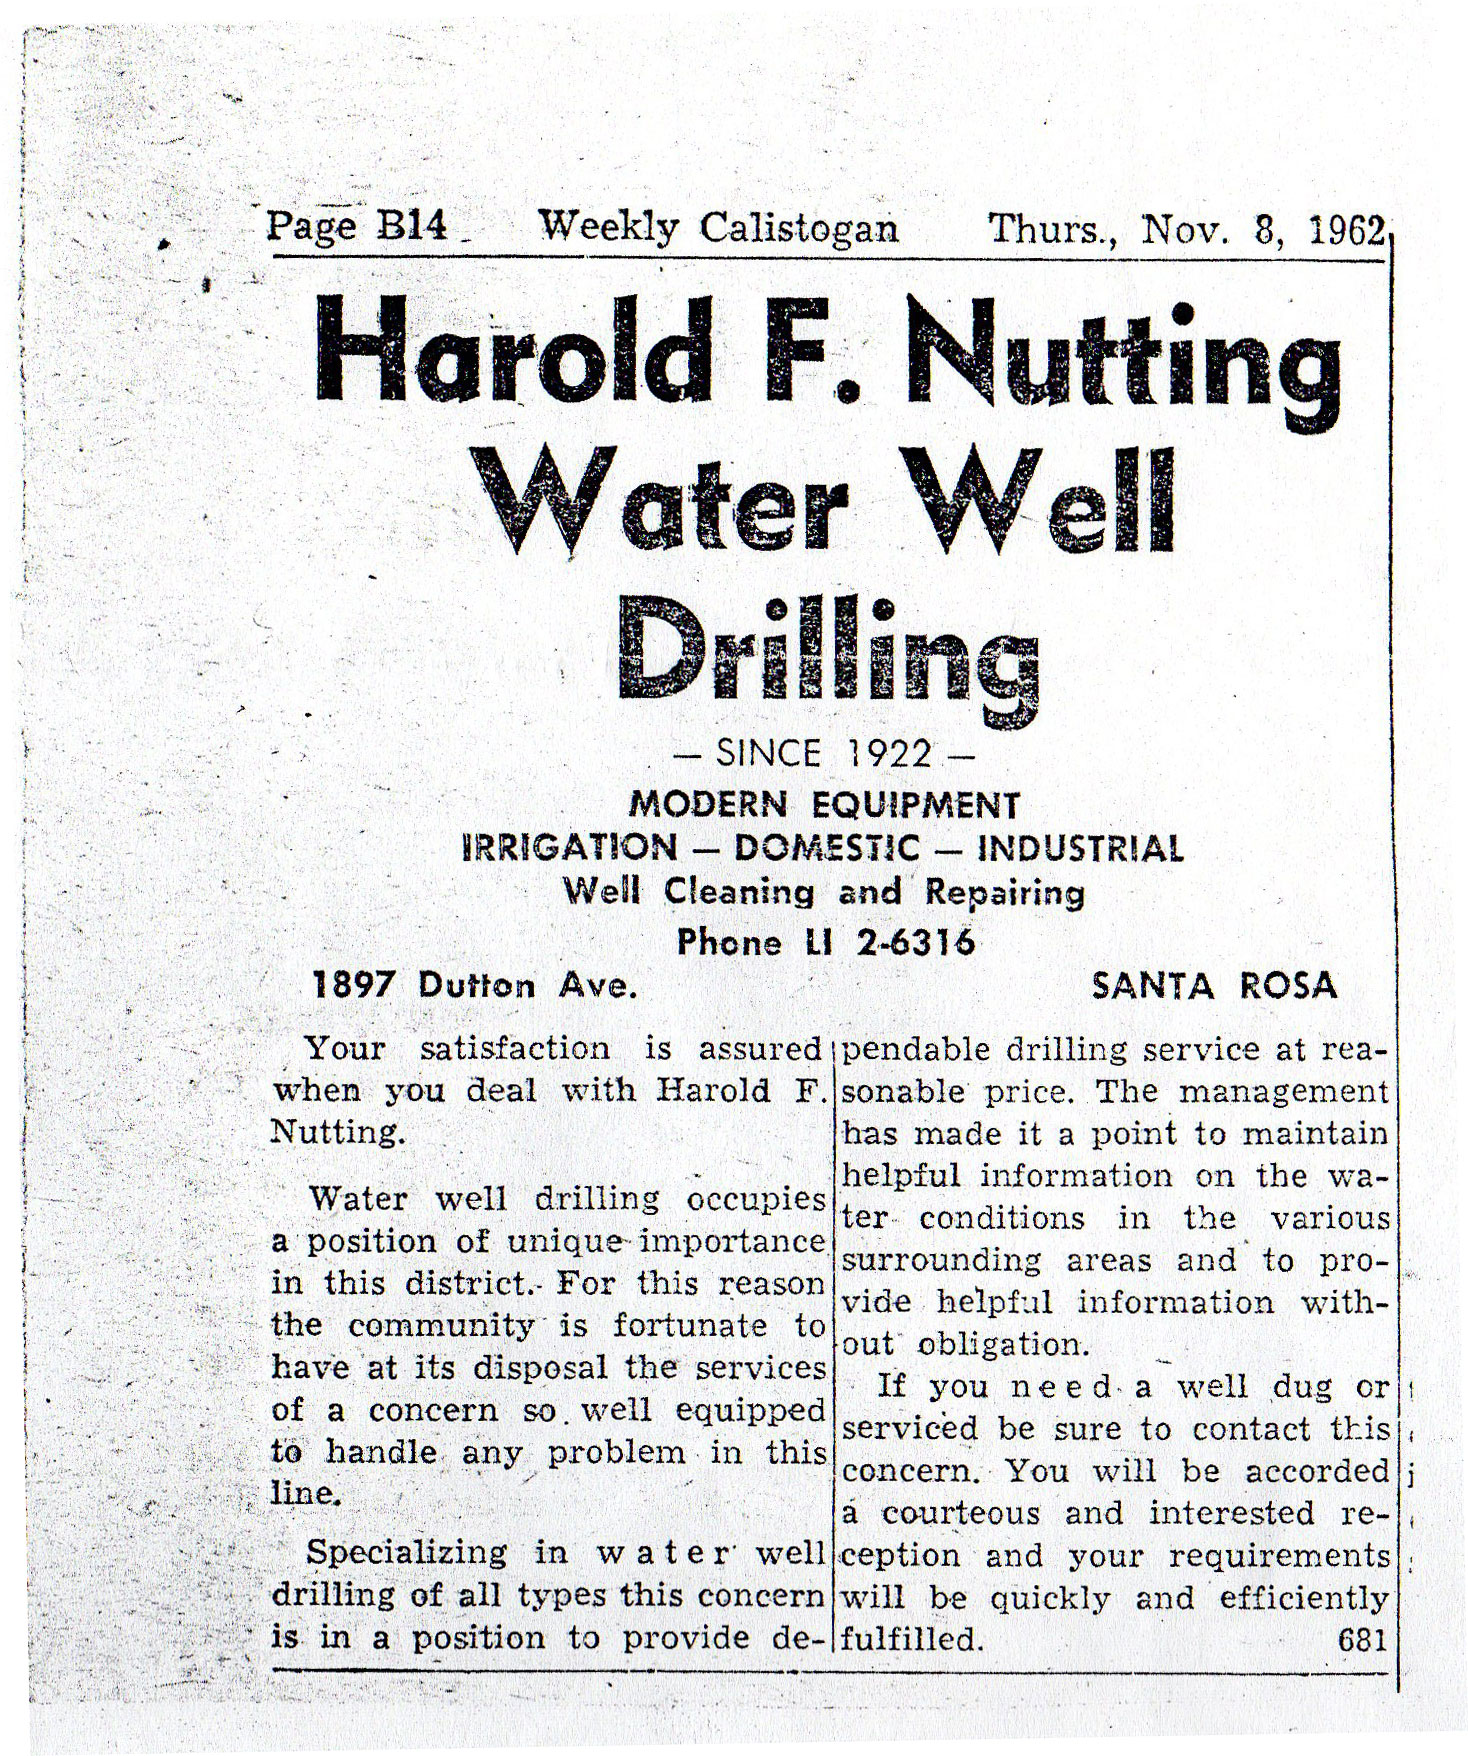 Article in the Weekly Calistogan regarding the Nutting drilling operations from 1962.